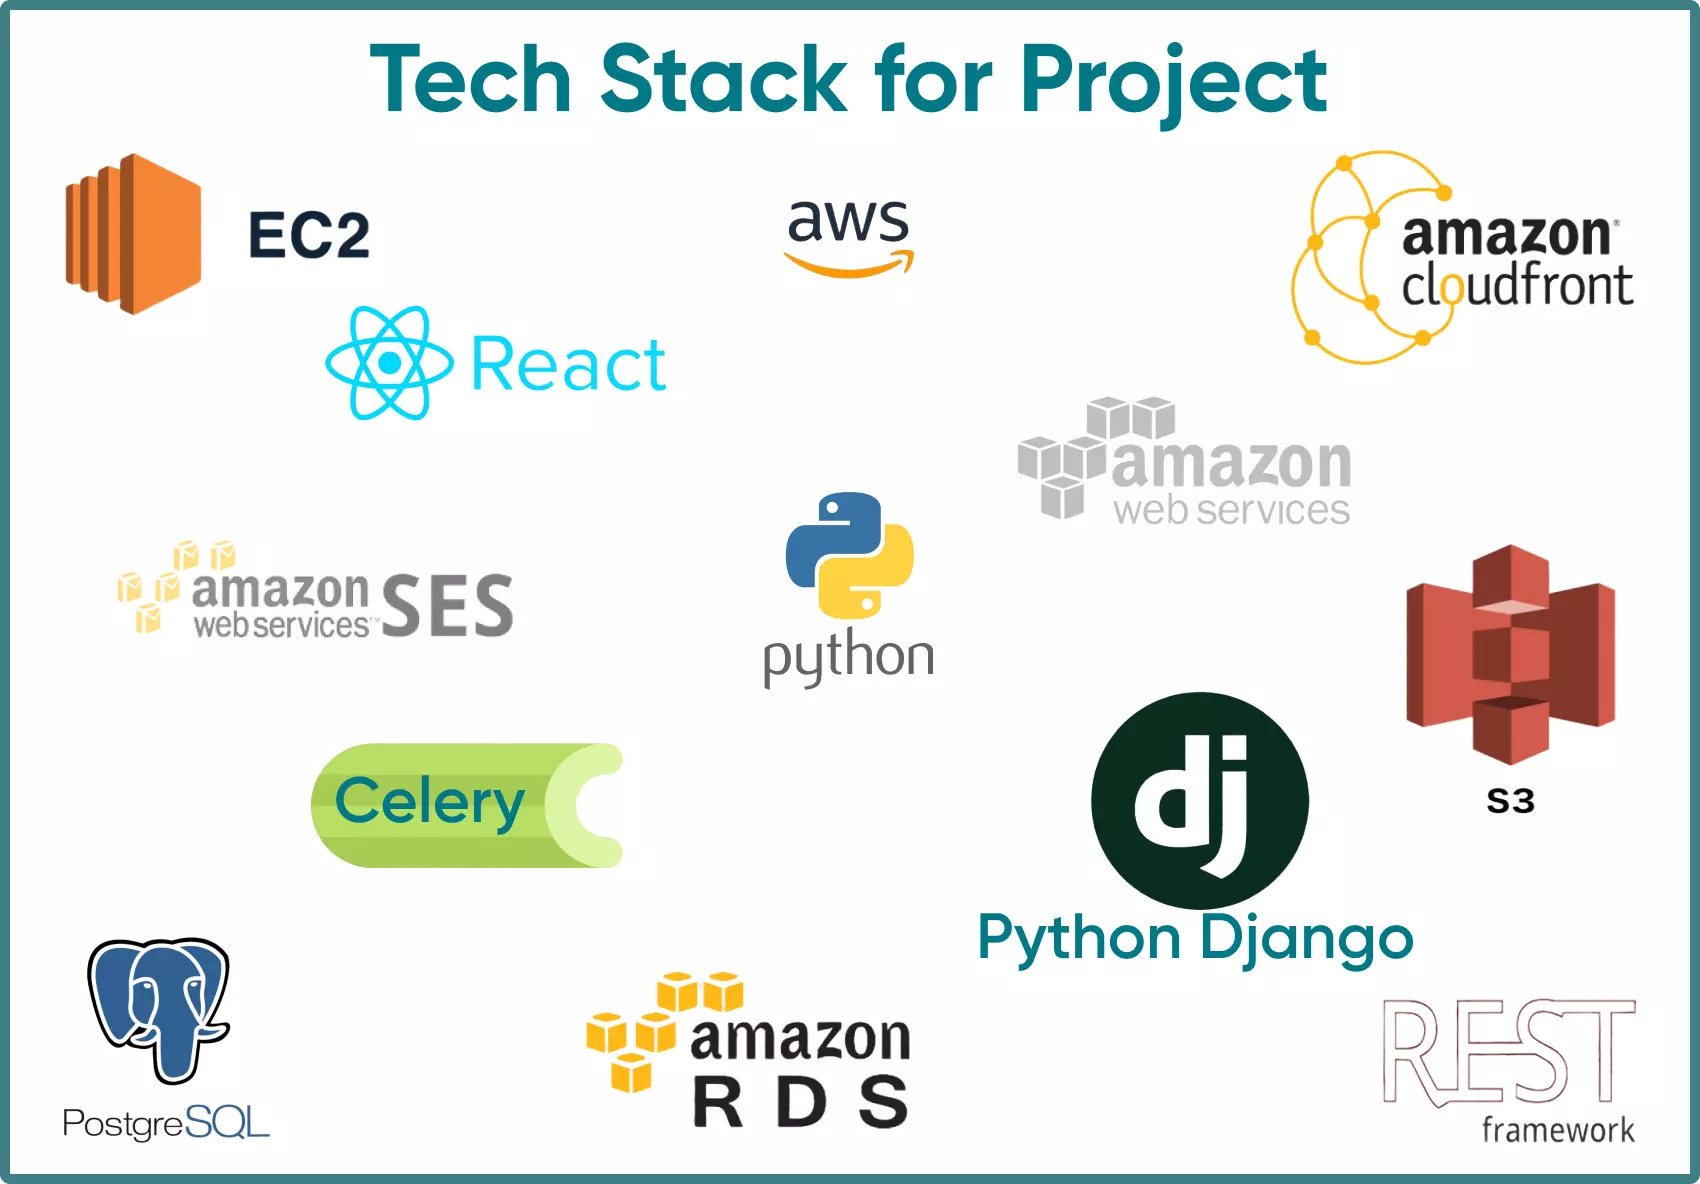 Discover the tech stack used for this specific project.